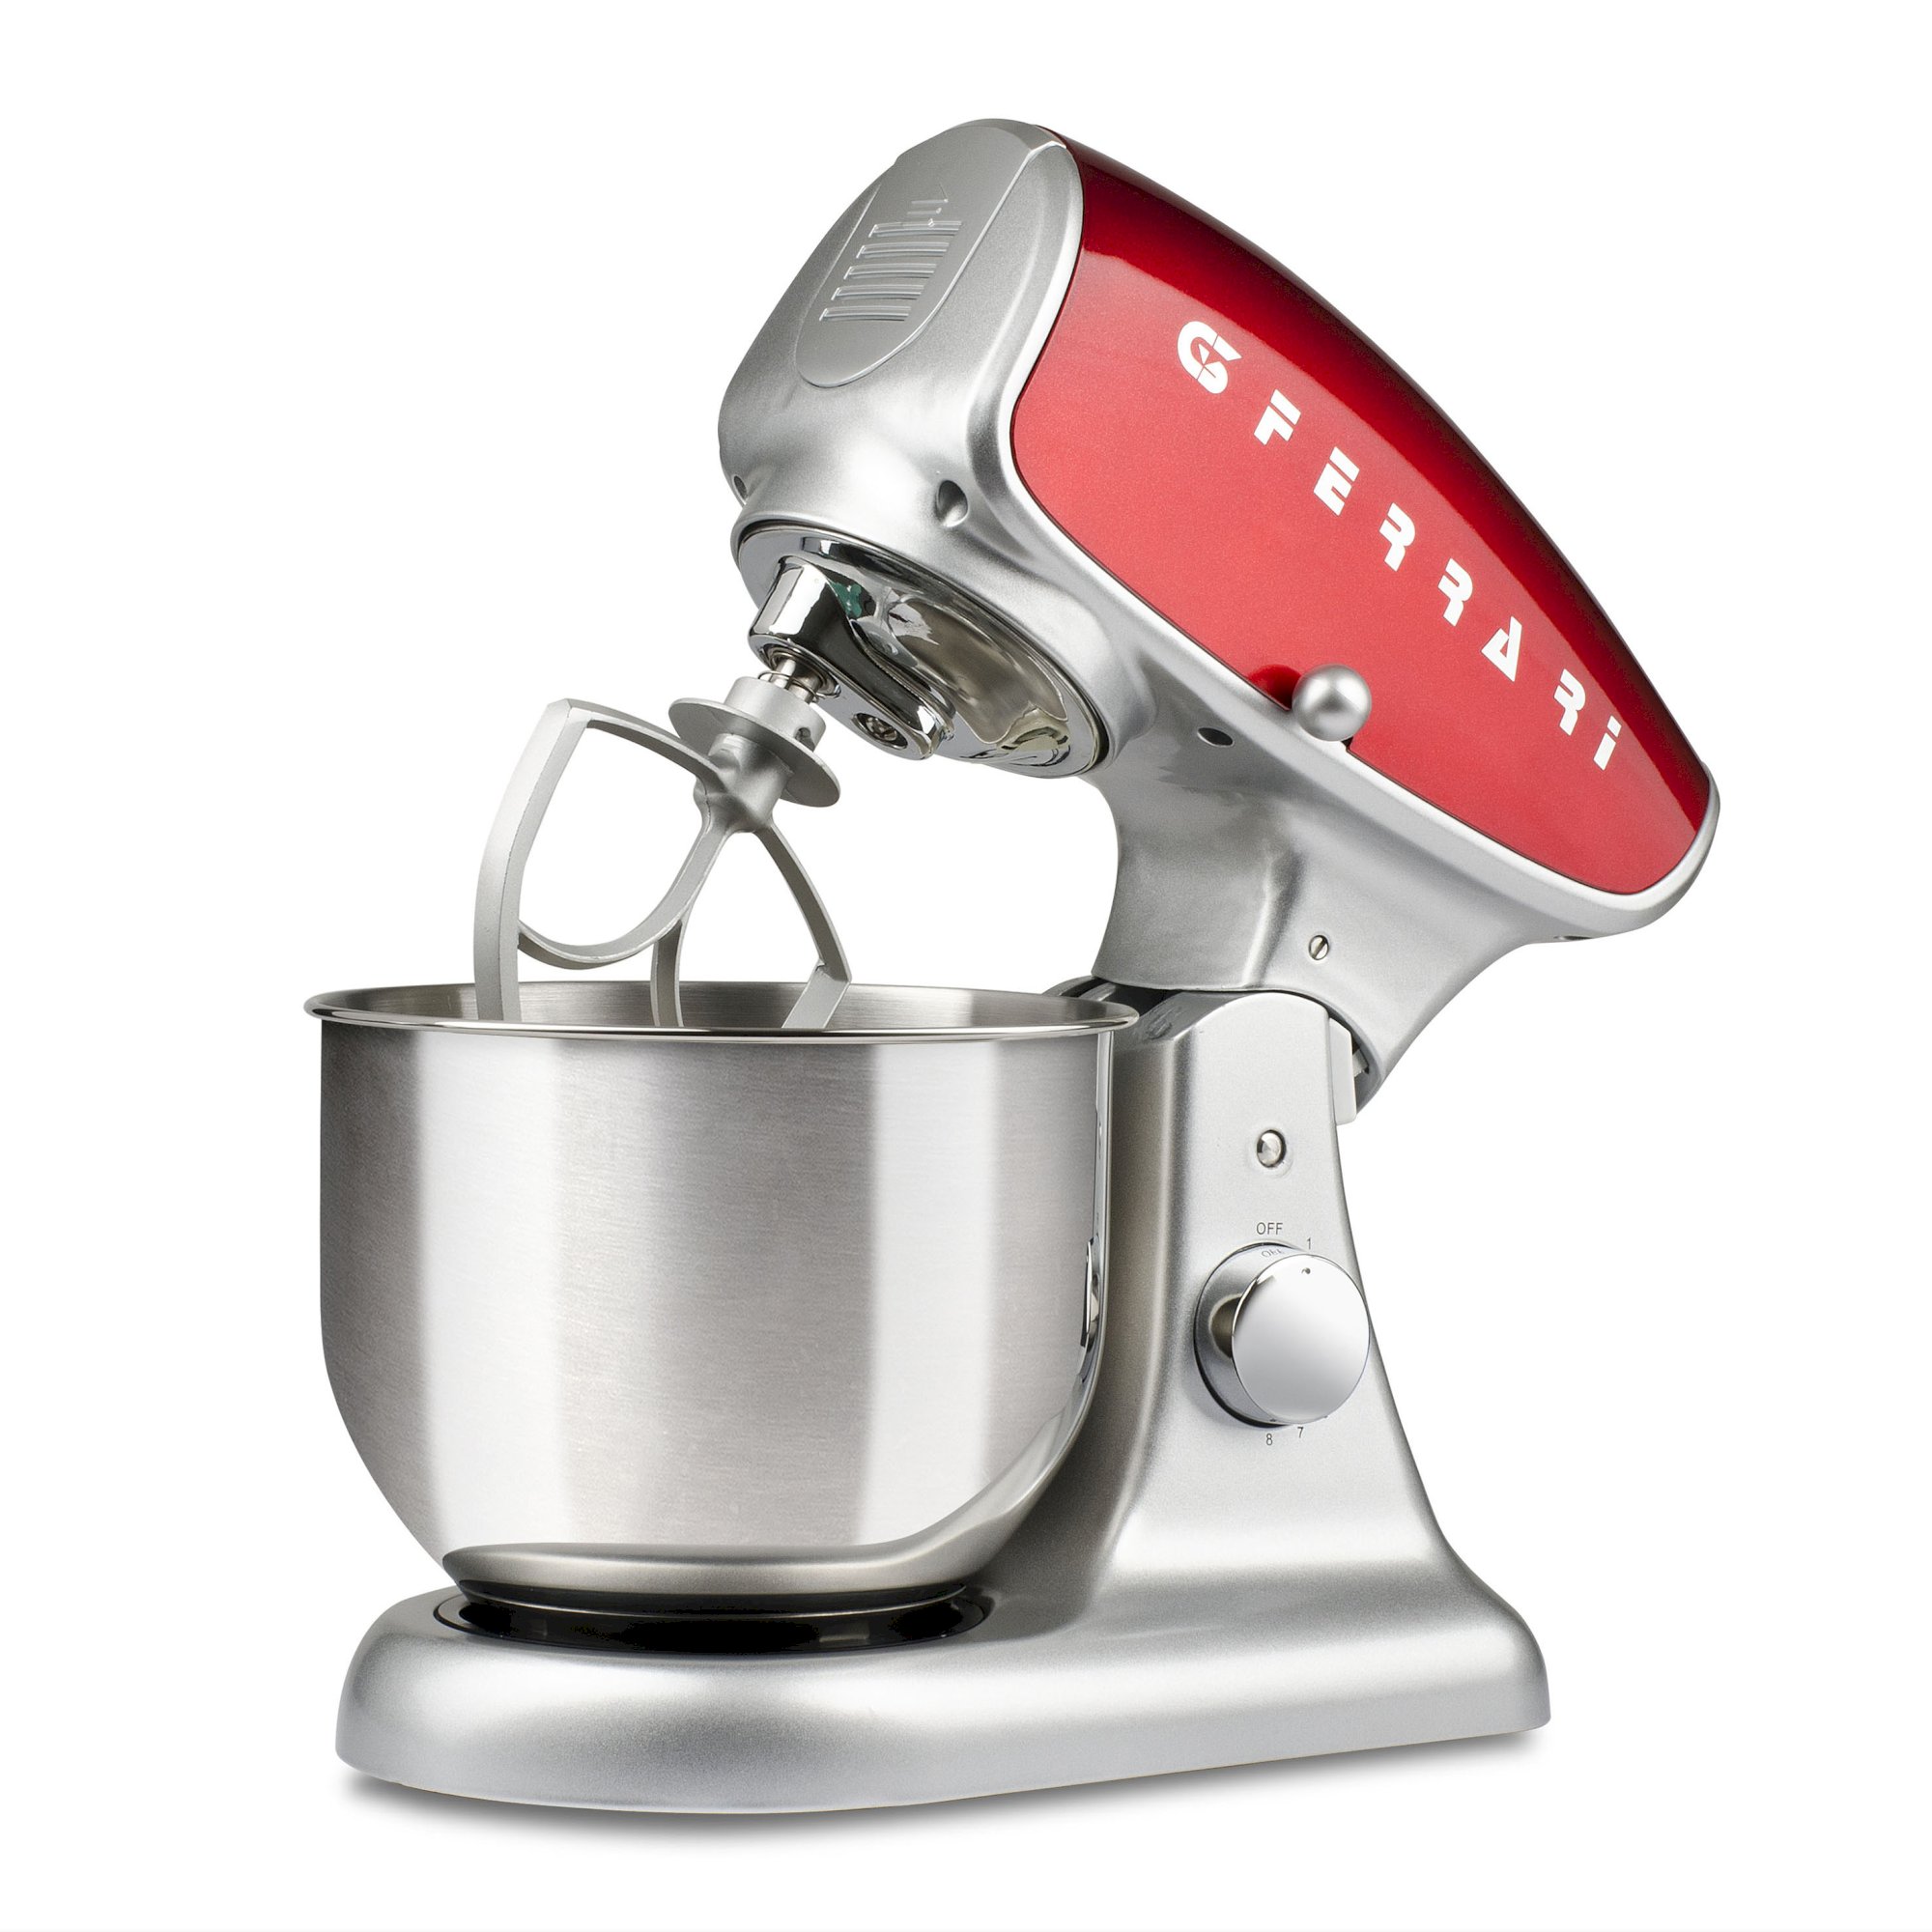 G2007506, Pastaio Deluxe, stand mixer, 5,2L, 1200W, zilver/rood